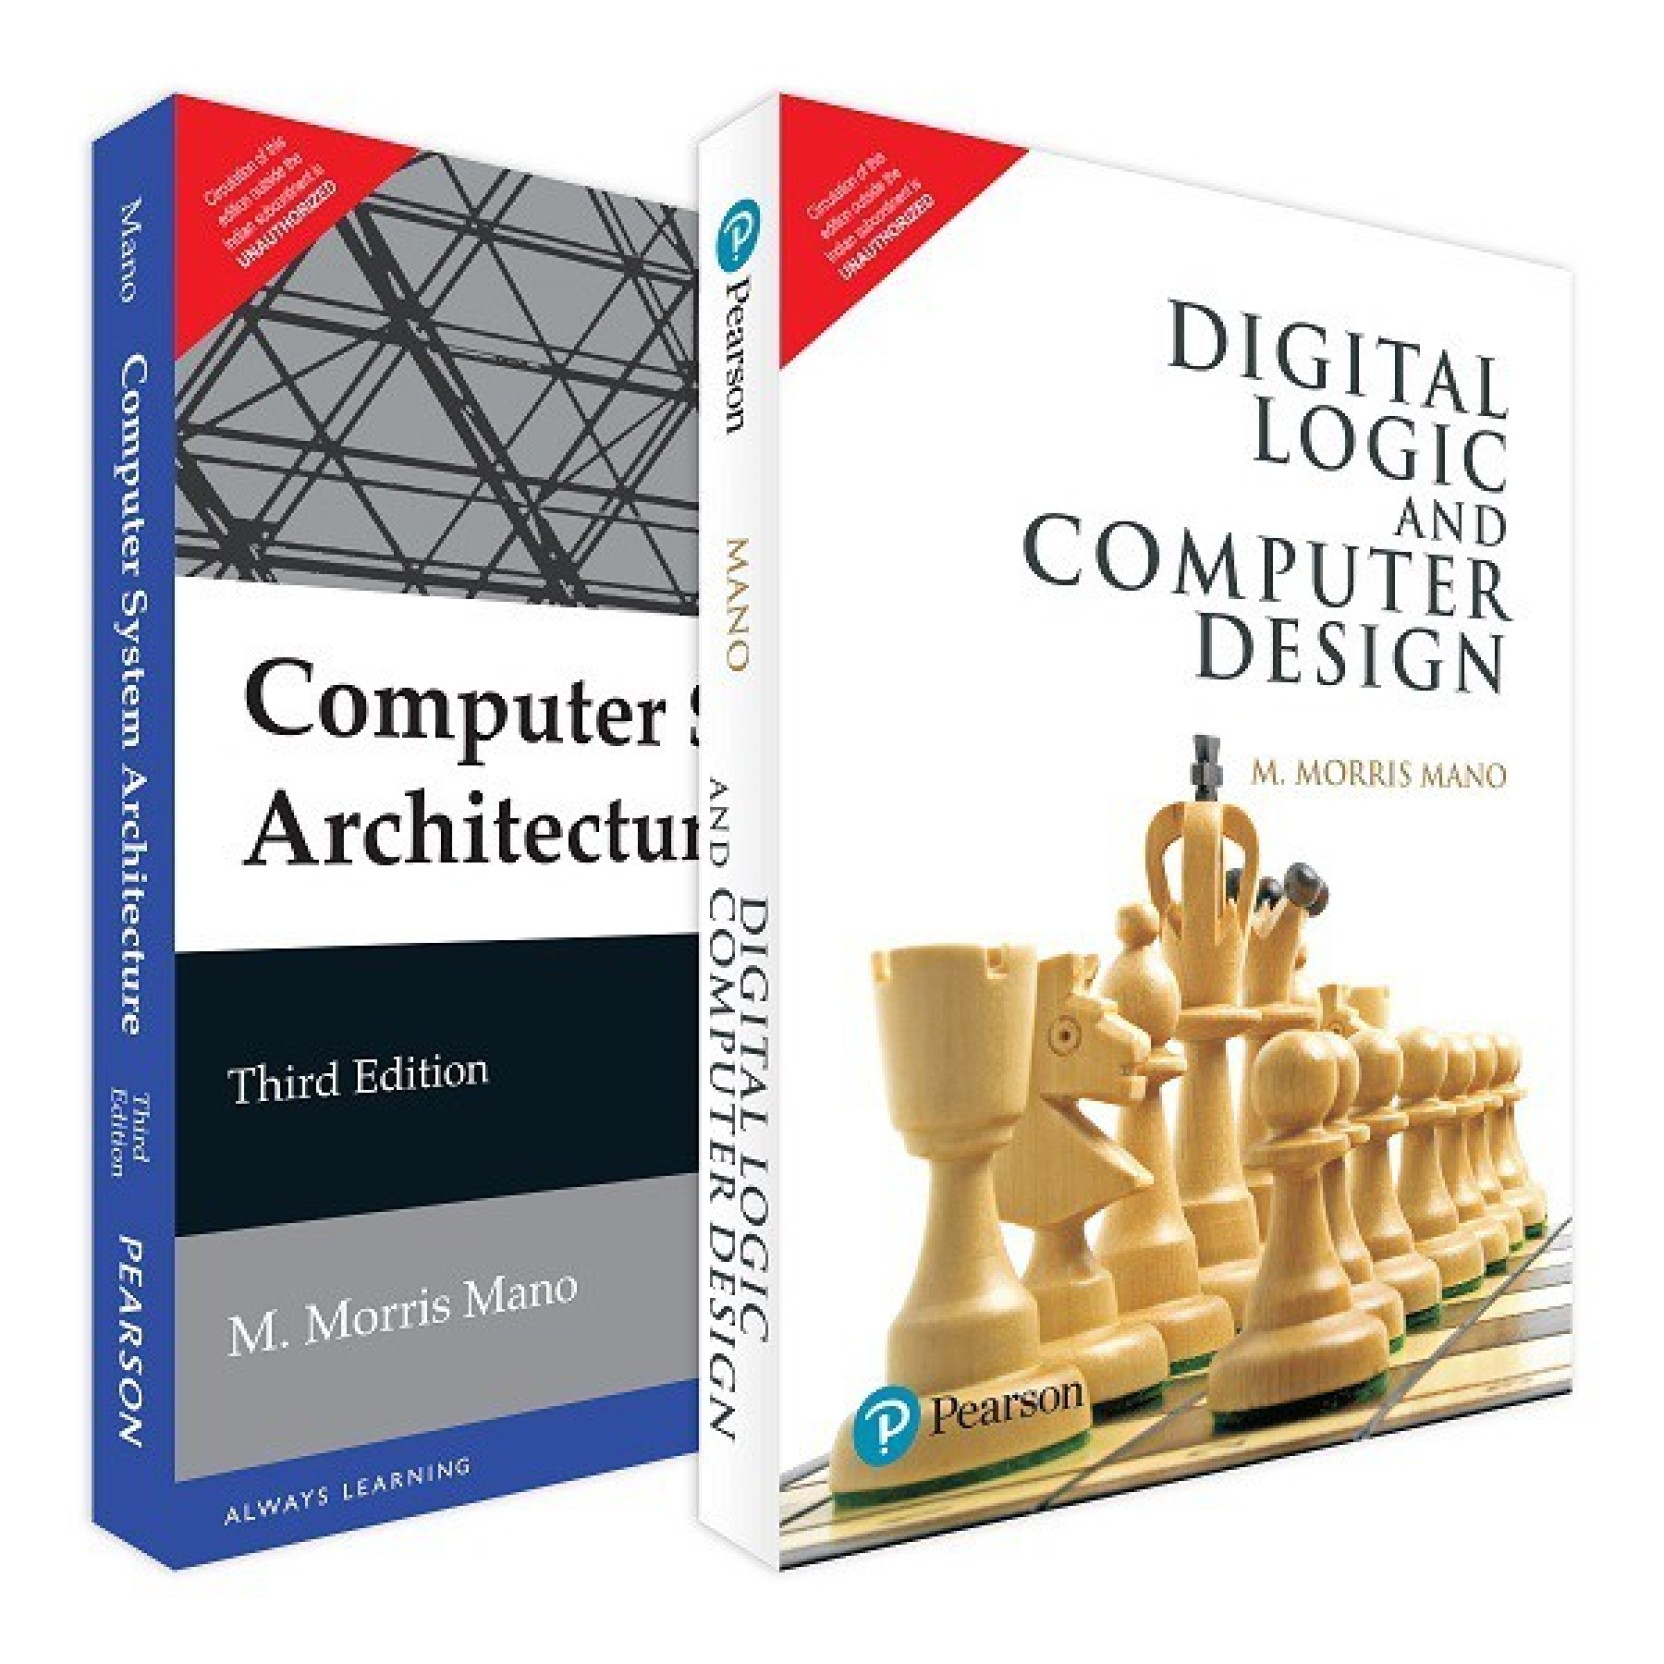 Digital Logic And Computer Design By Morris Mano 5th Edition